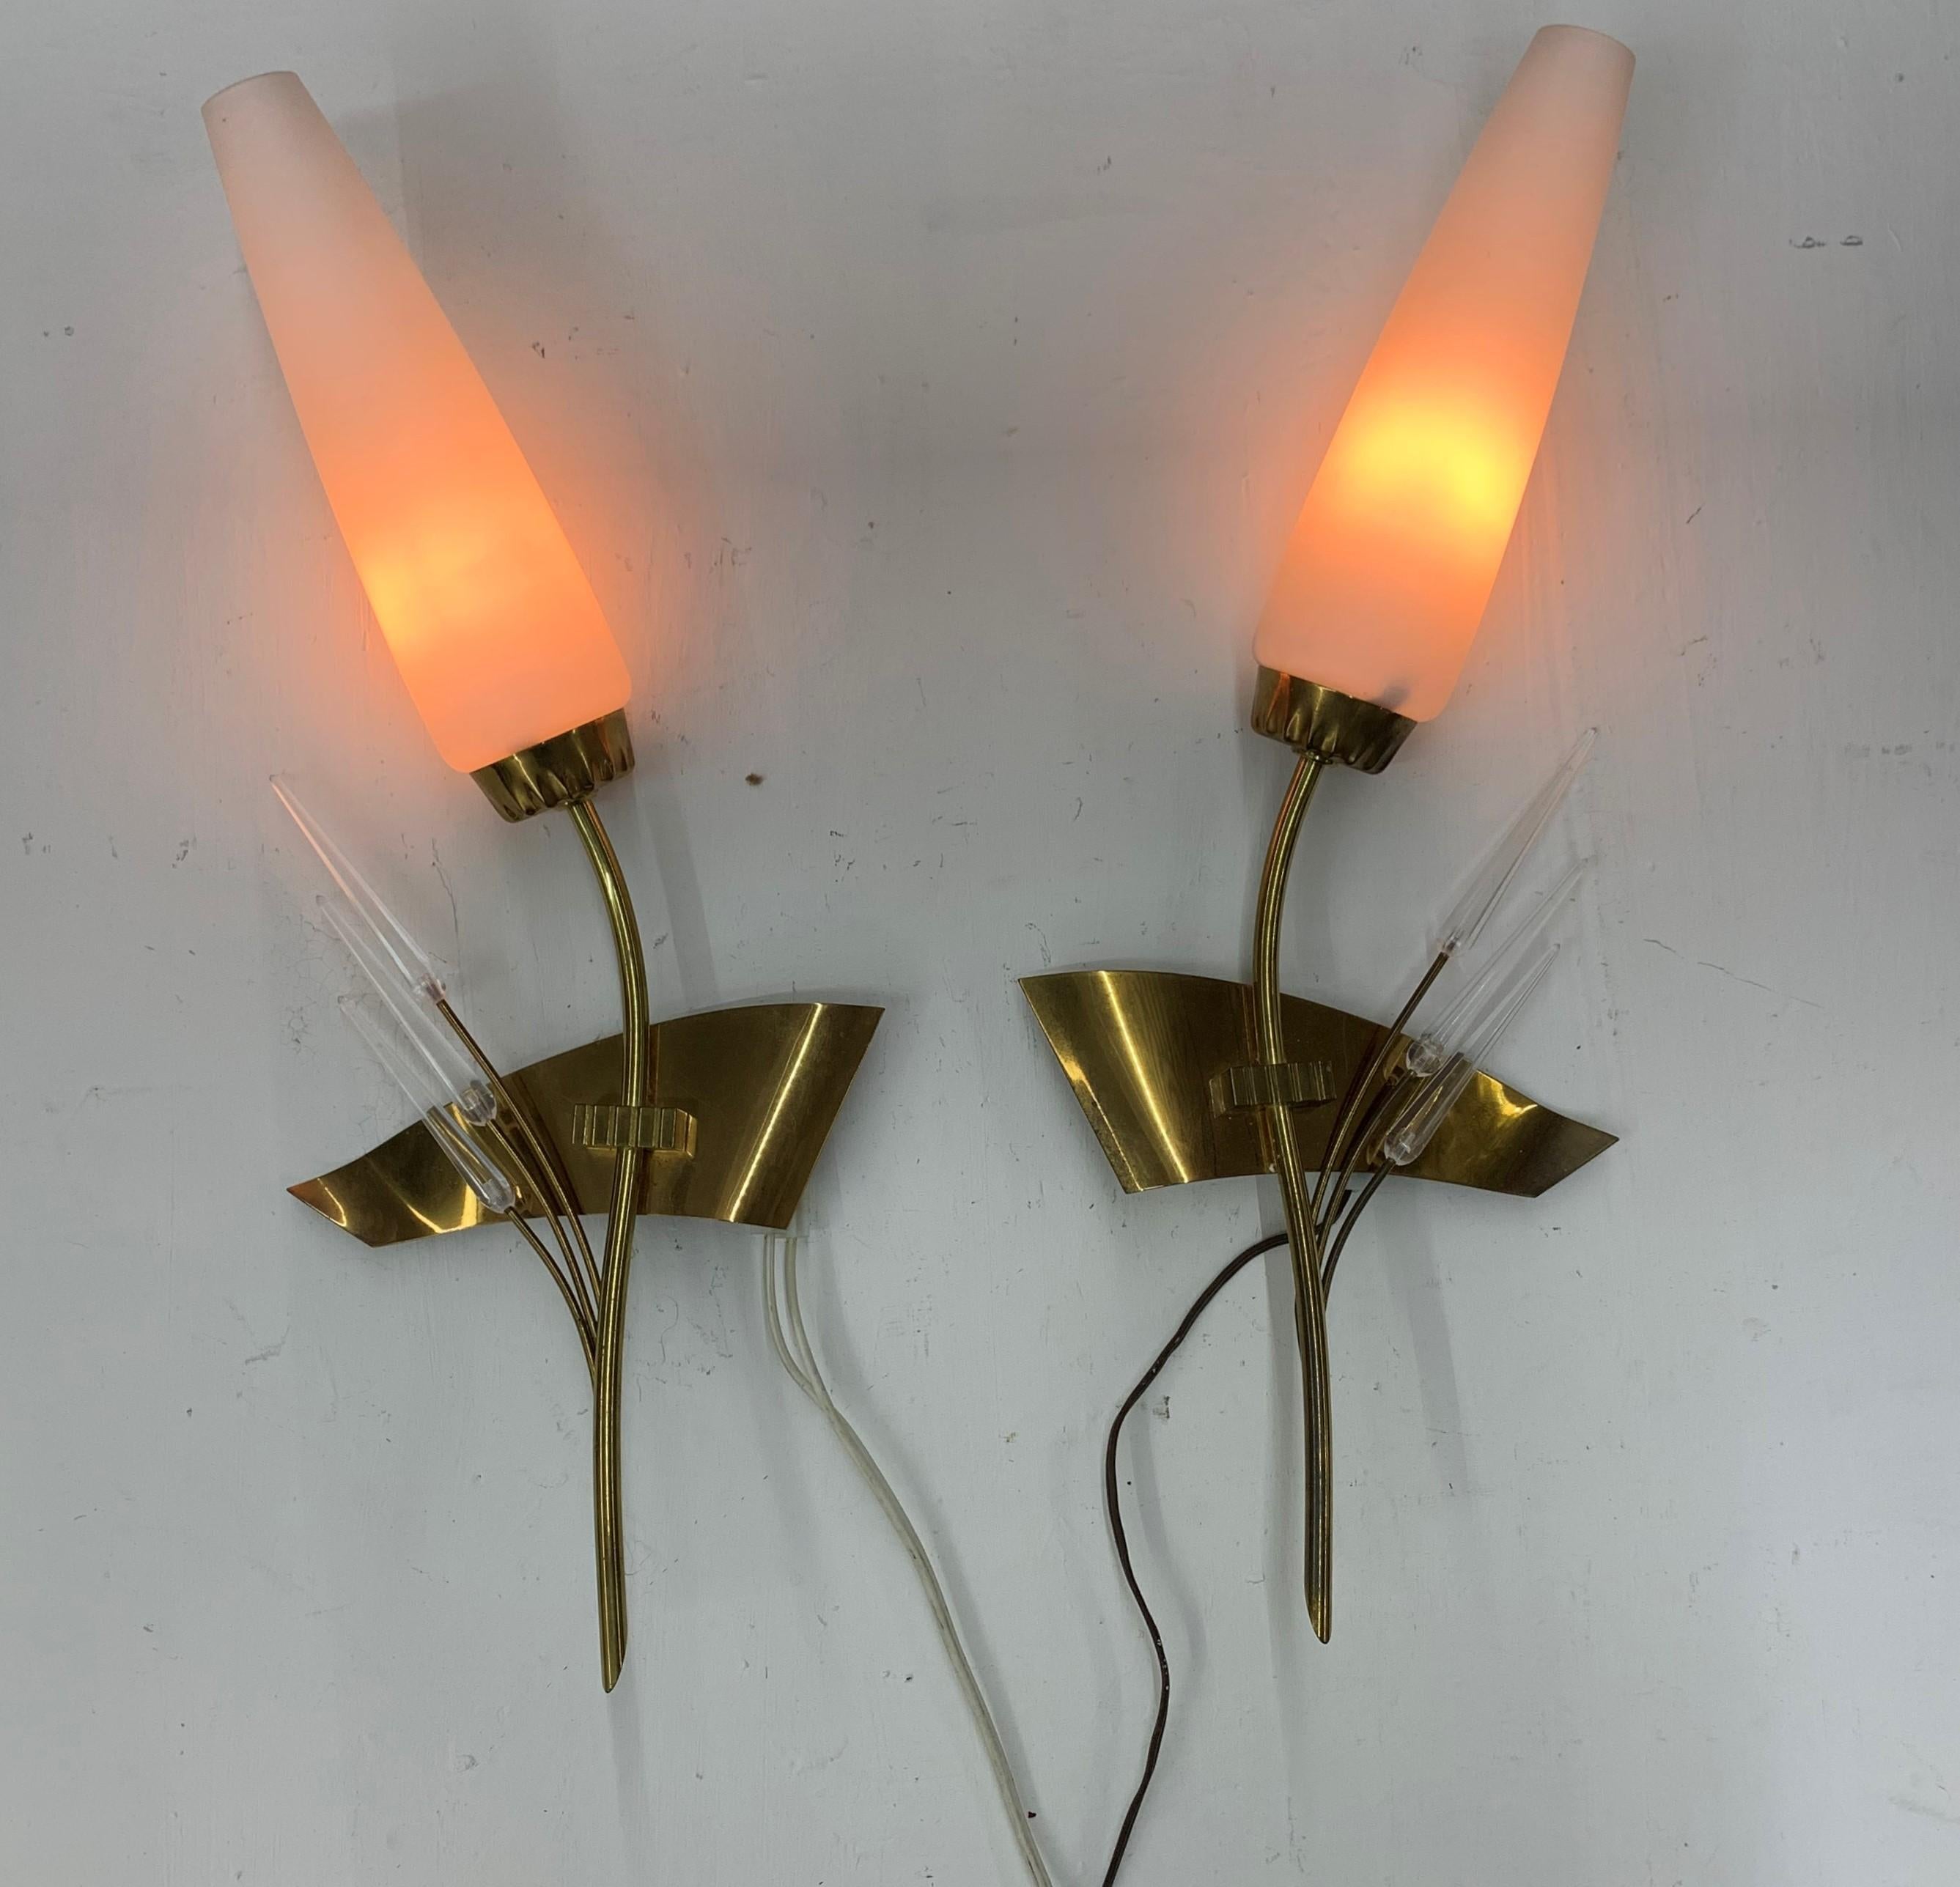 Pair of Modernist Sconces by Maison Arlus in Brass and Opaline Glass, France In Good Condition For Sale In Merida, Yucatan